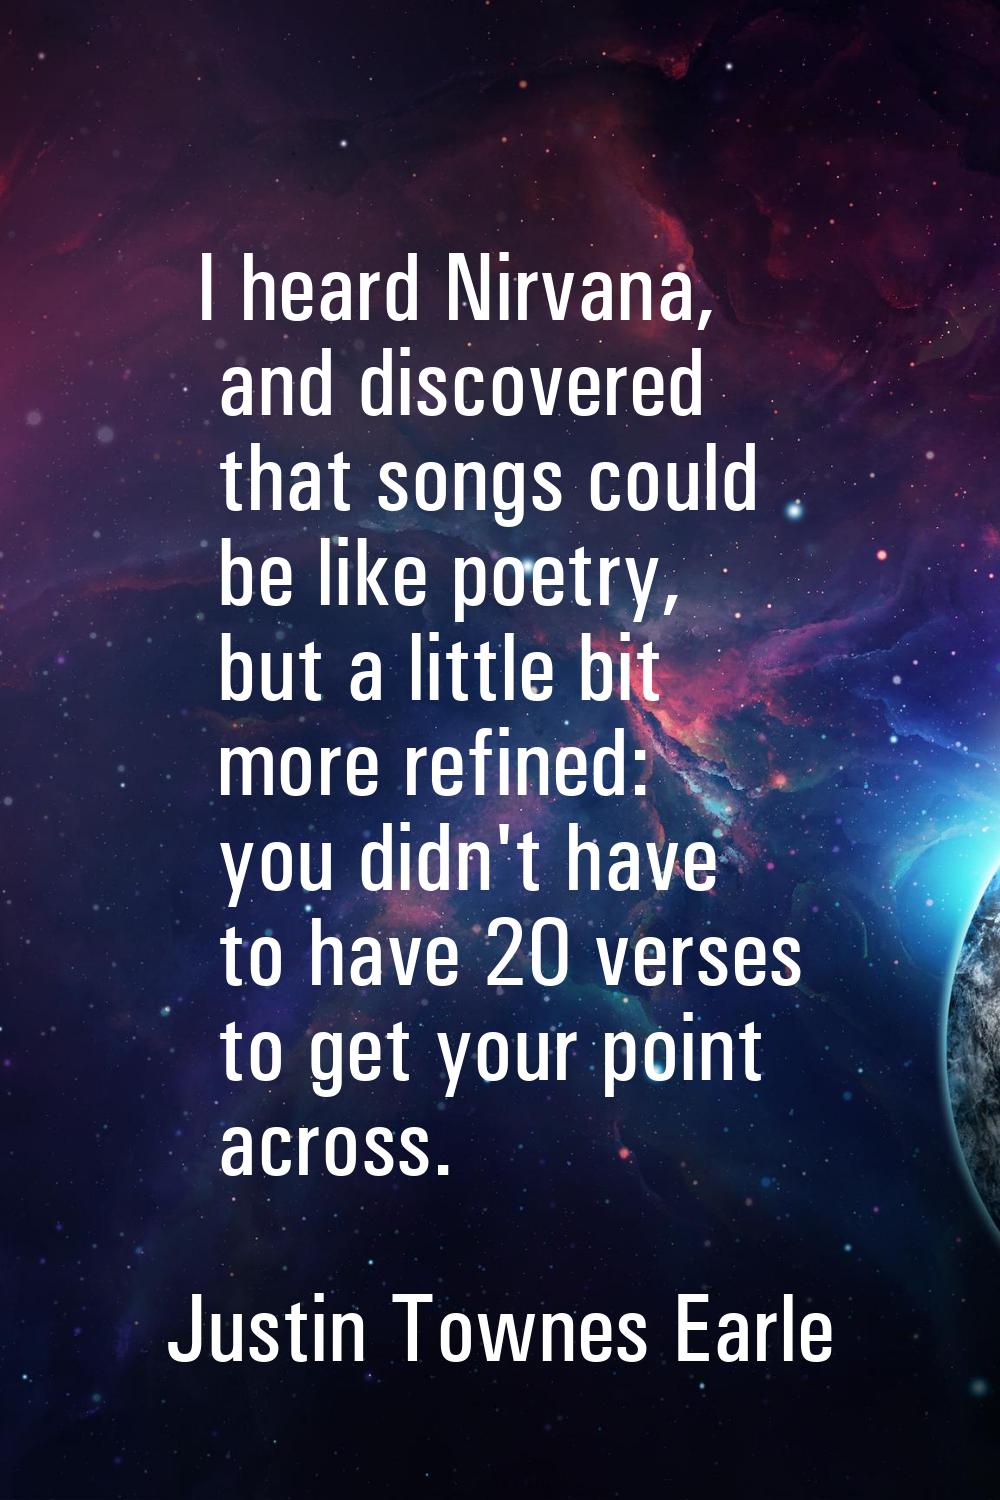 I heard Nirvana, and discovered that songs could be like poetry, but a little bit more refined: you